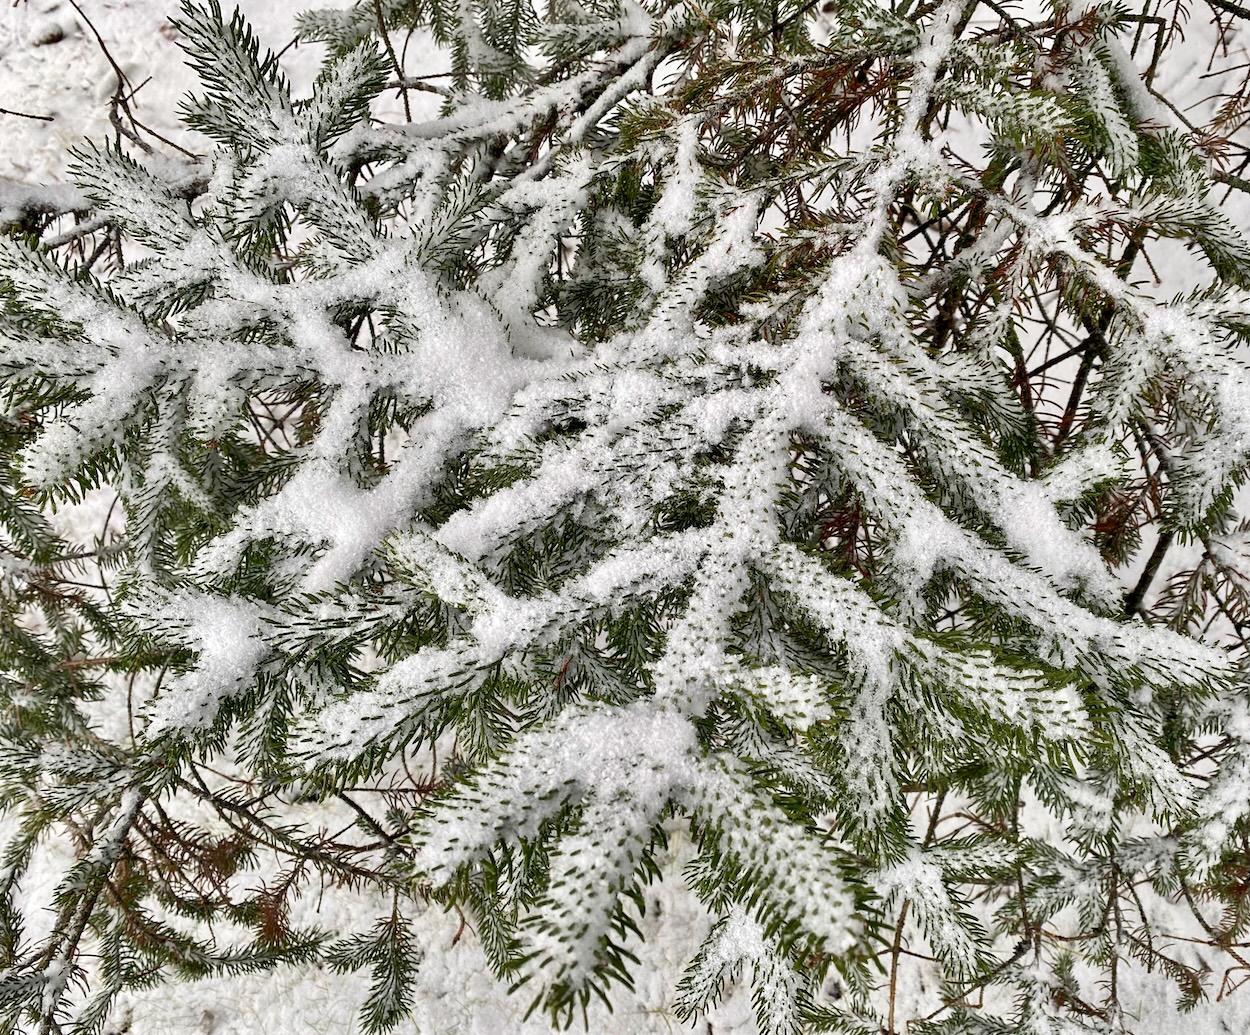 Pine Boughs in Snow